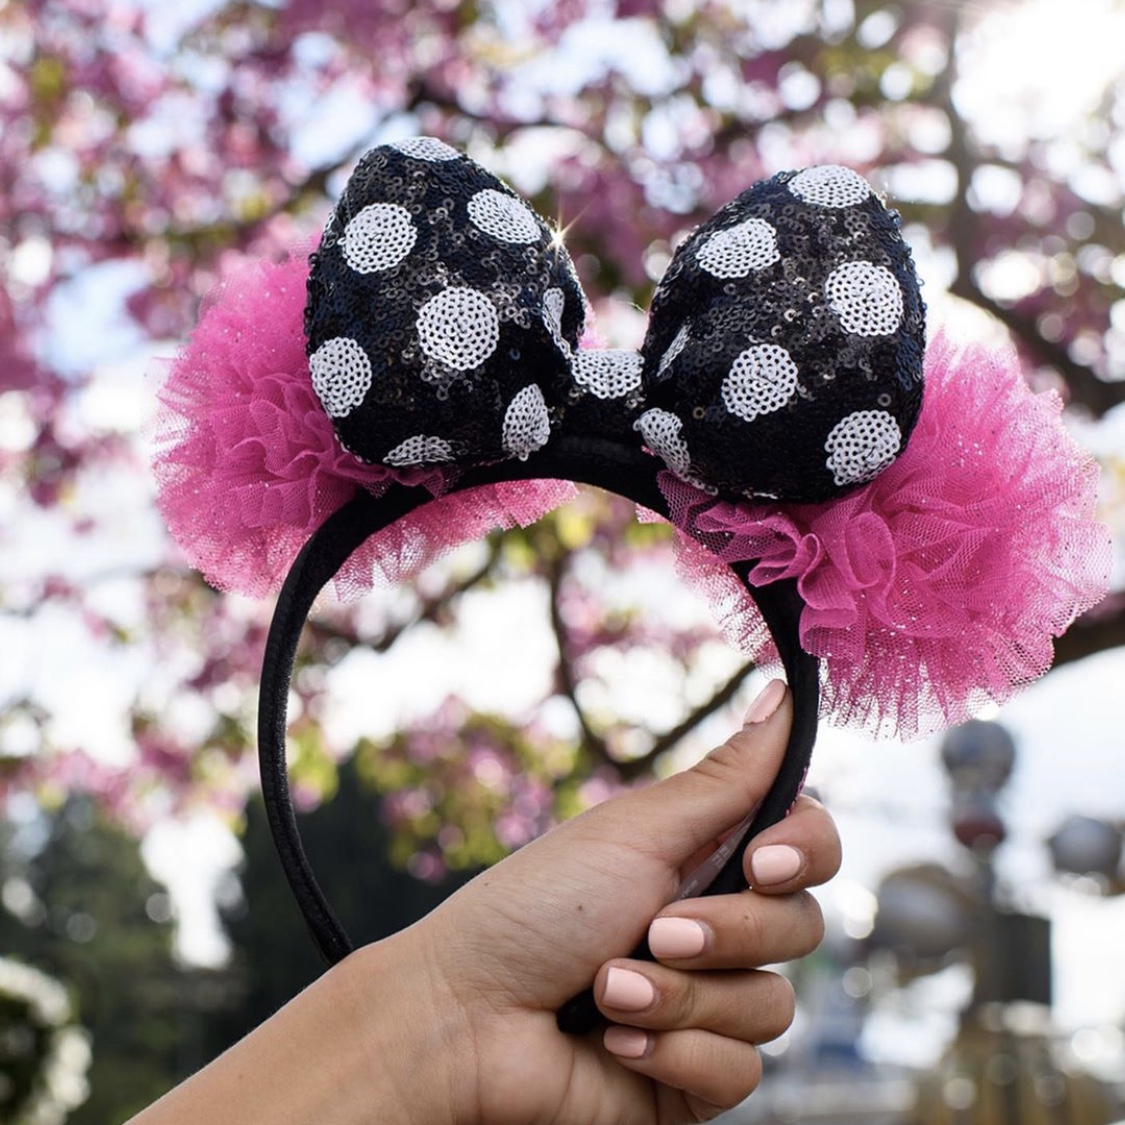 Limited-release Designer Disney mouse ears soon to wreck my budget